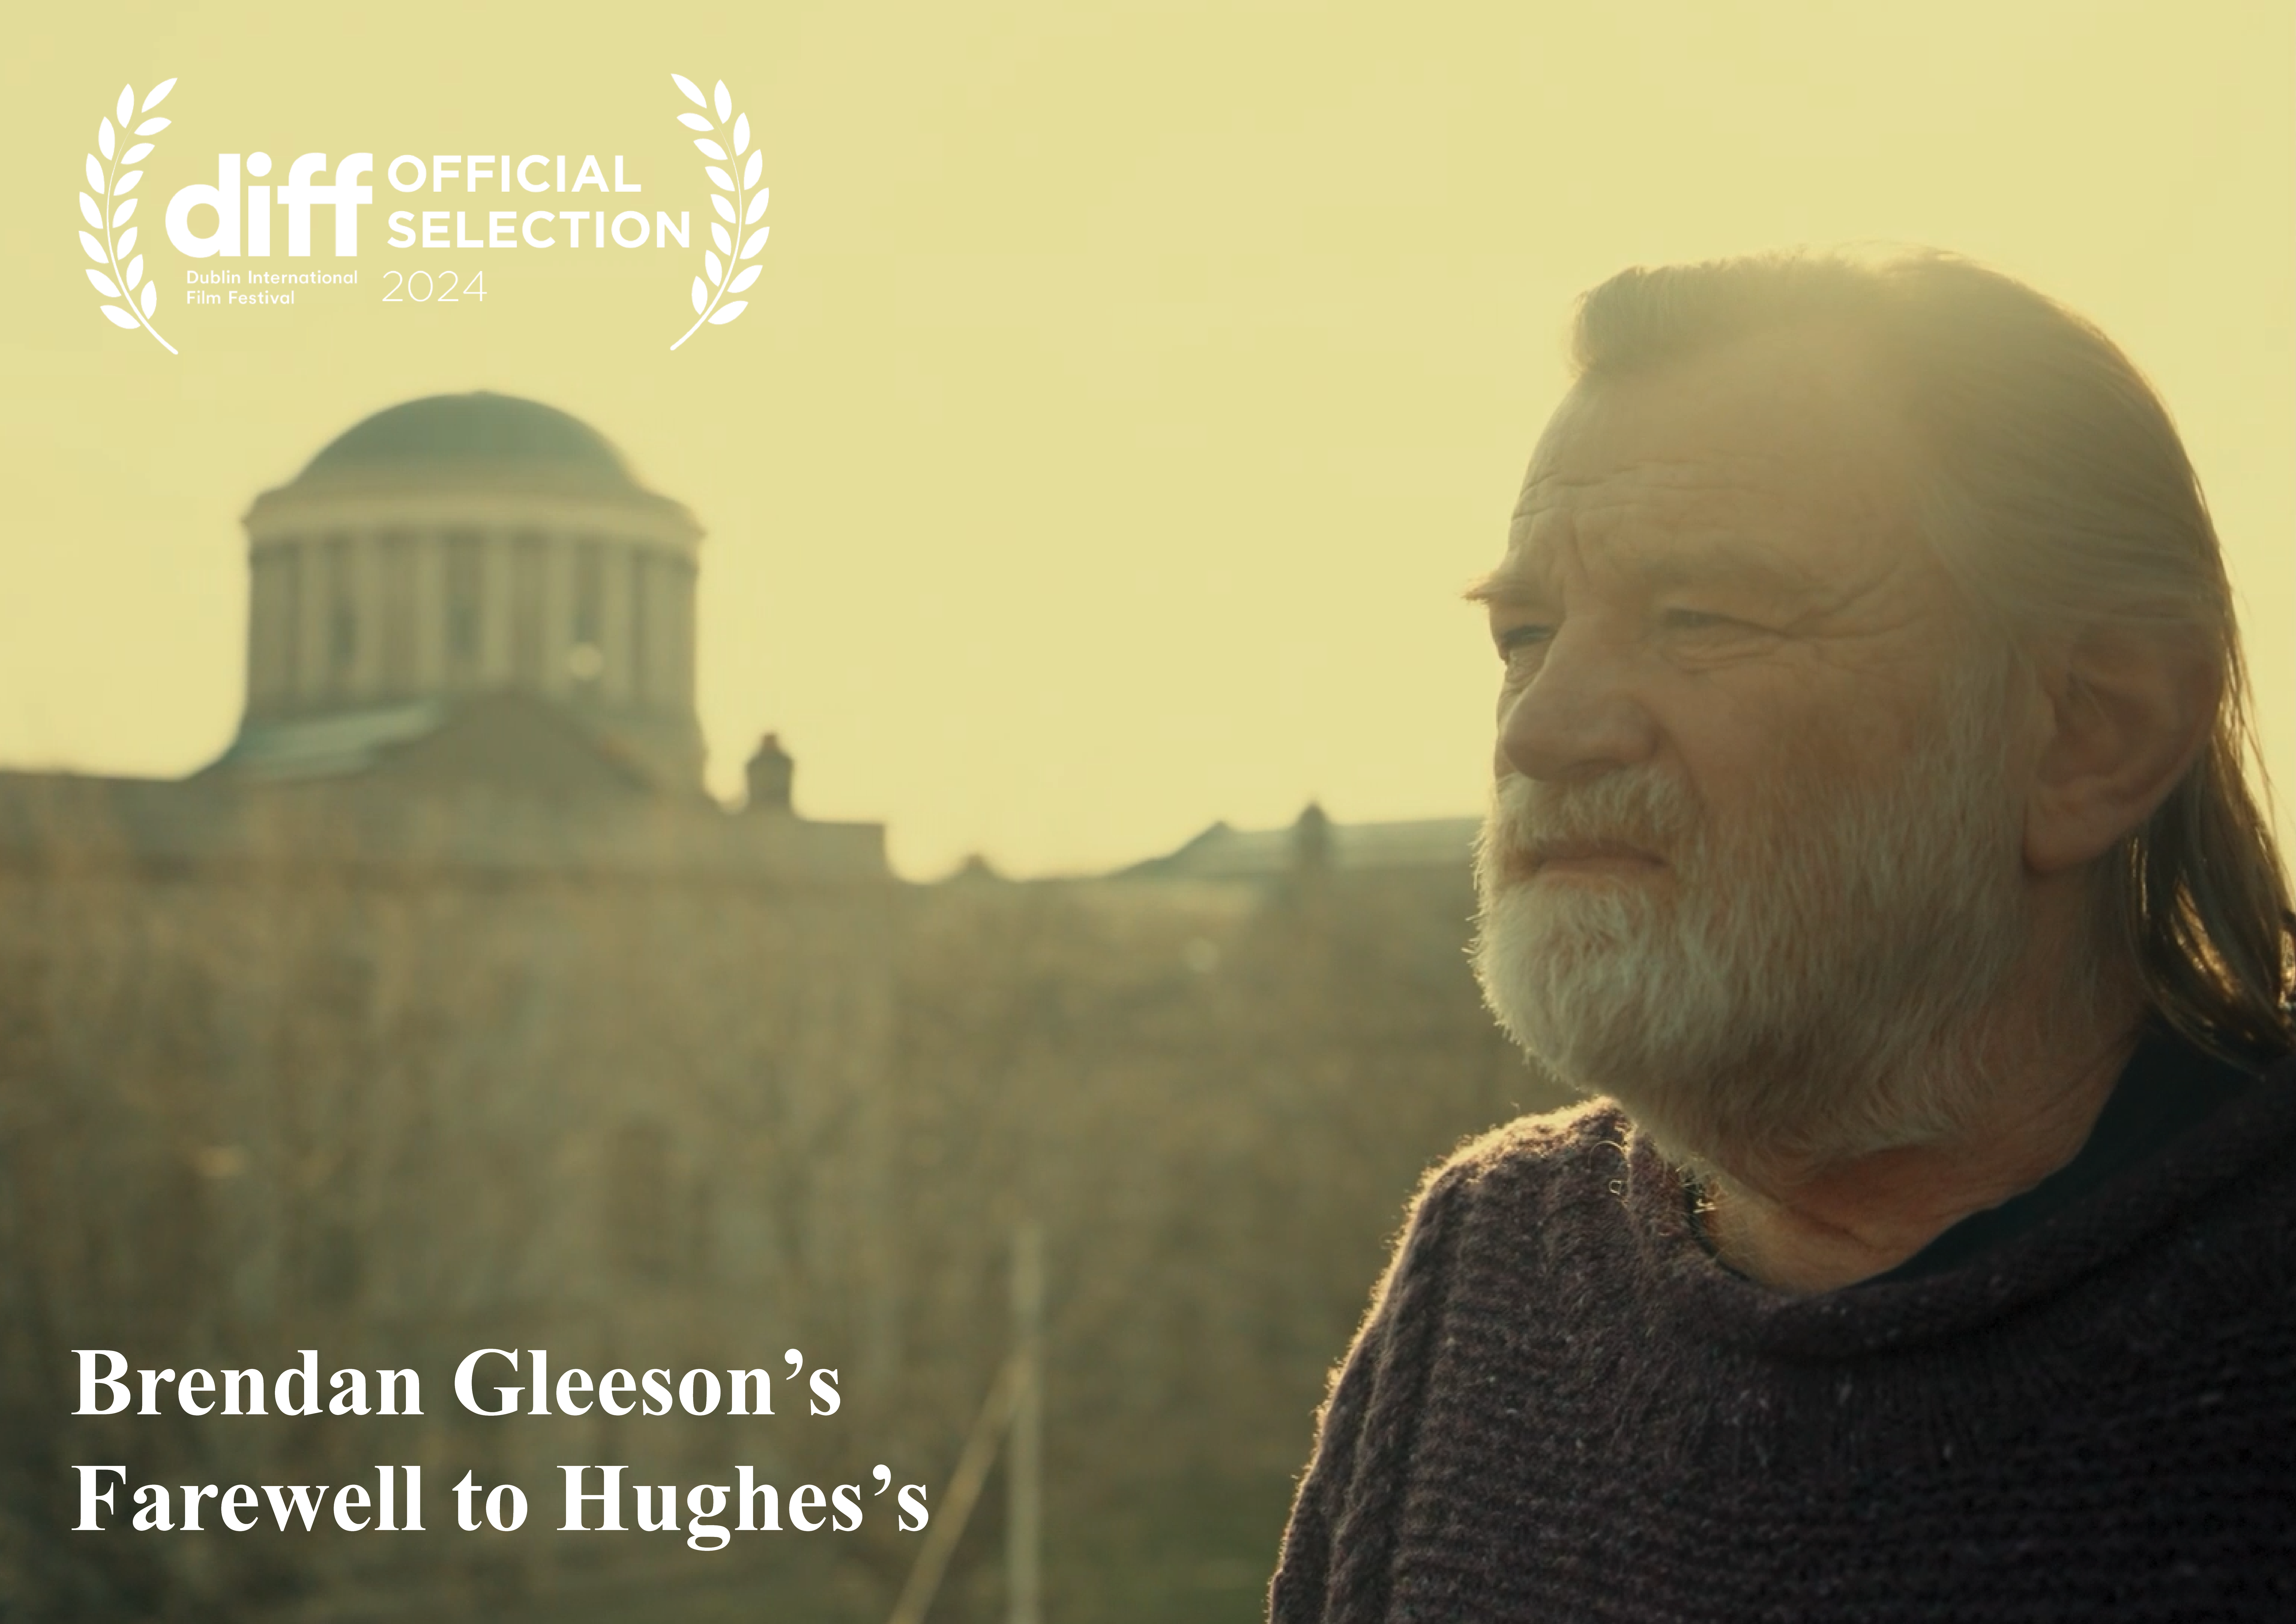 Poster for the film 'Brendan Gleeson's Farewell to Hughes's'. The poster features a close-up shot of Brendan Gleeson, with the Dublin Four Courts in the background.